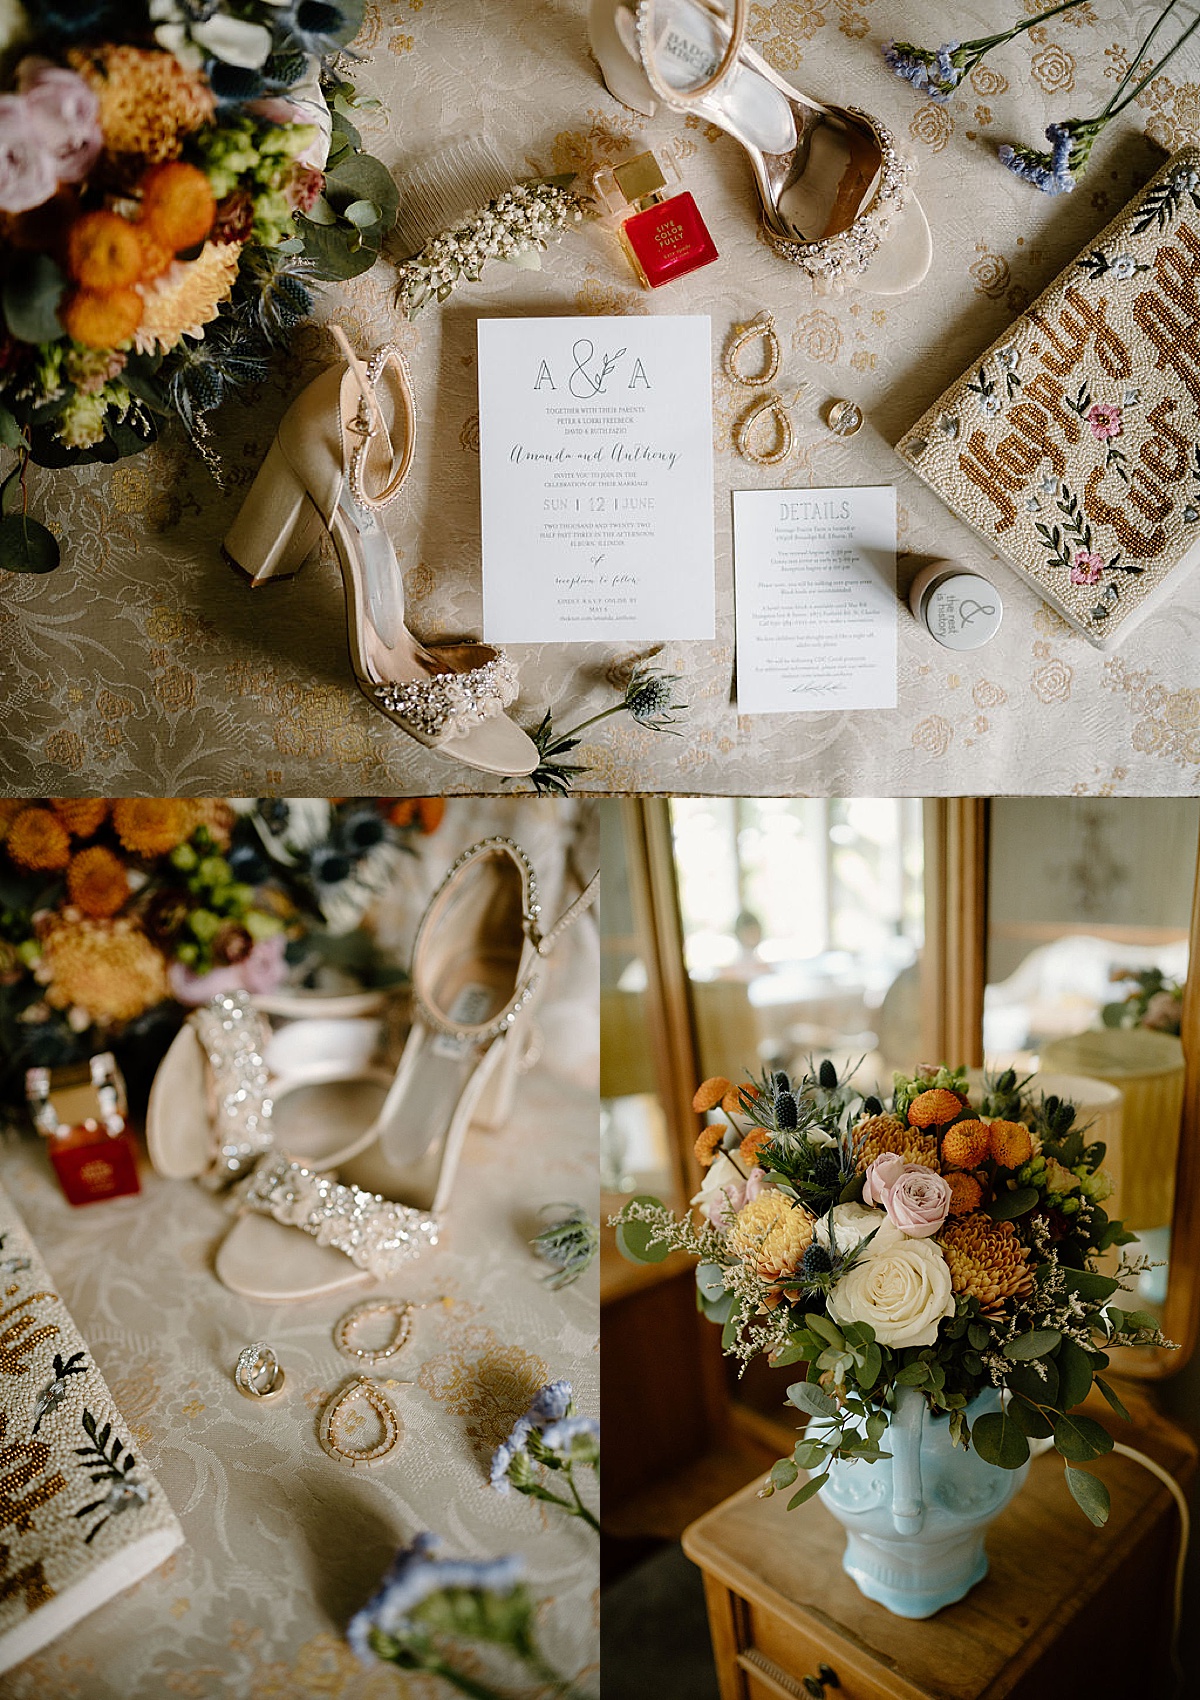 wedding invitation, embellished high heels, beaded clutch, and bouquets sit ready for rustic summer wedding at Heritage Prairie Farm